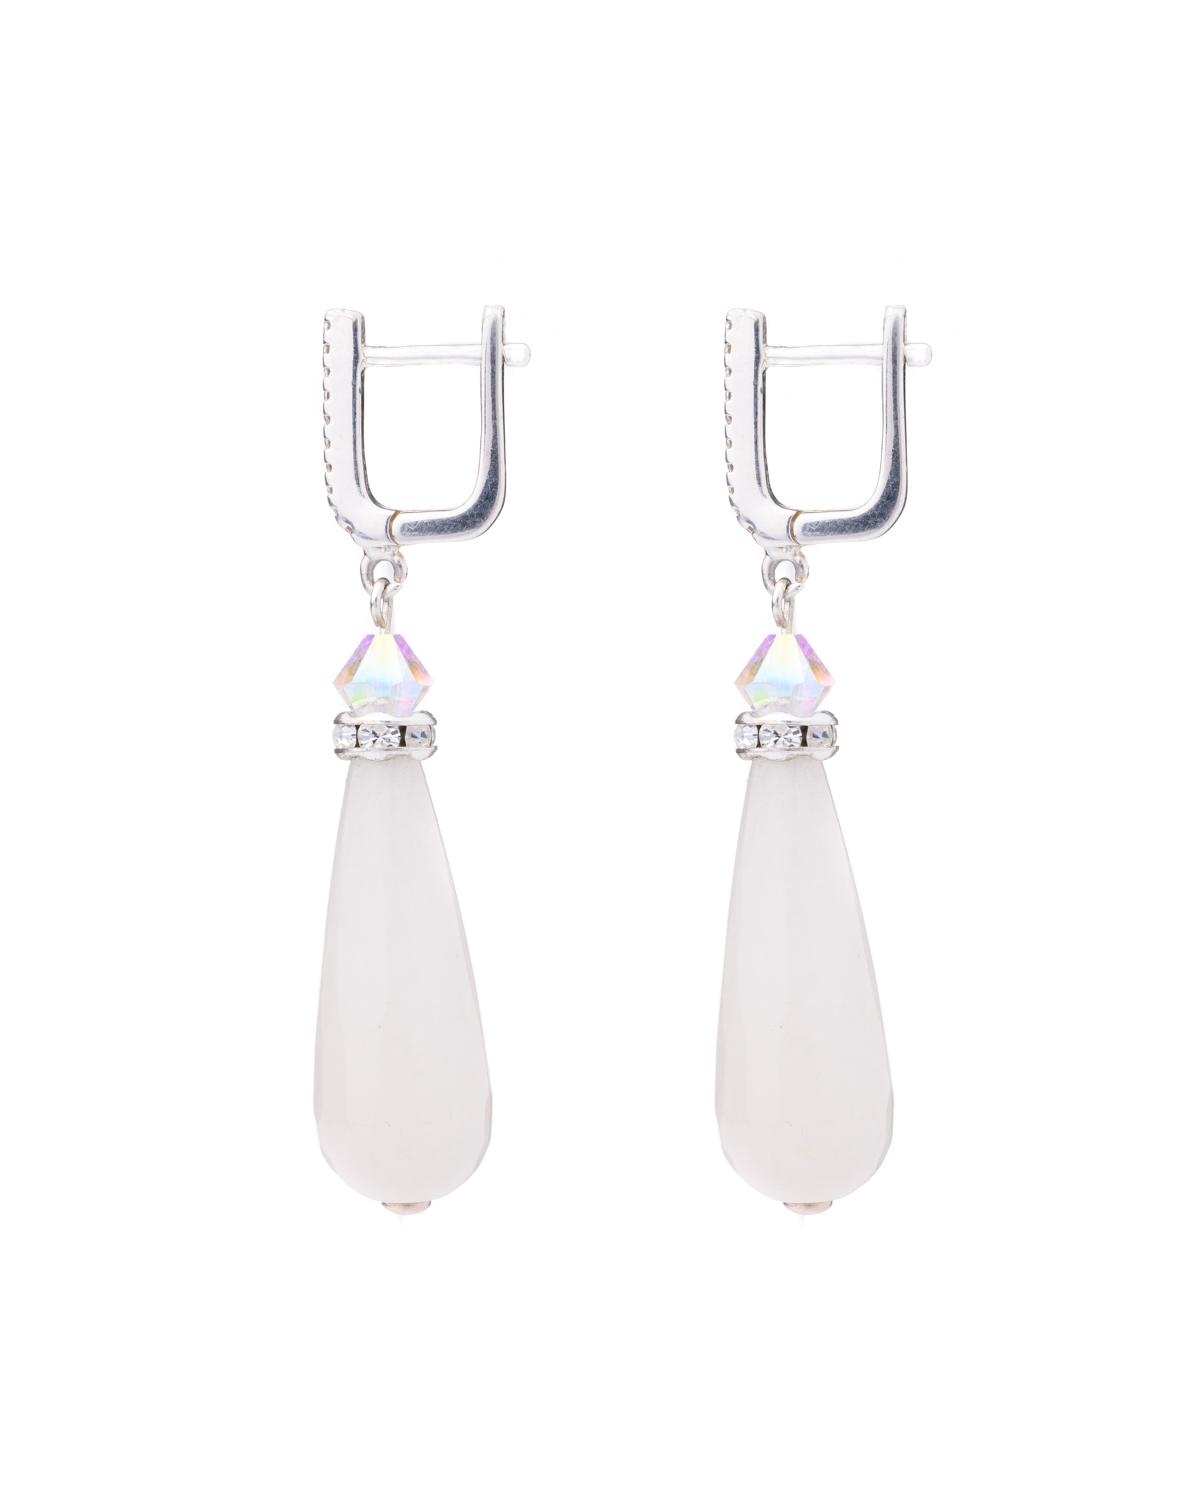 Drop Silver Earrings – Ivory color – Cubic Zirconia Leverback